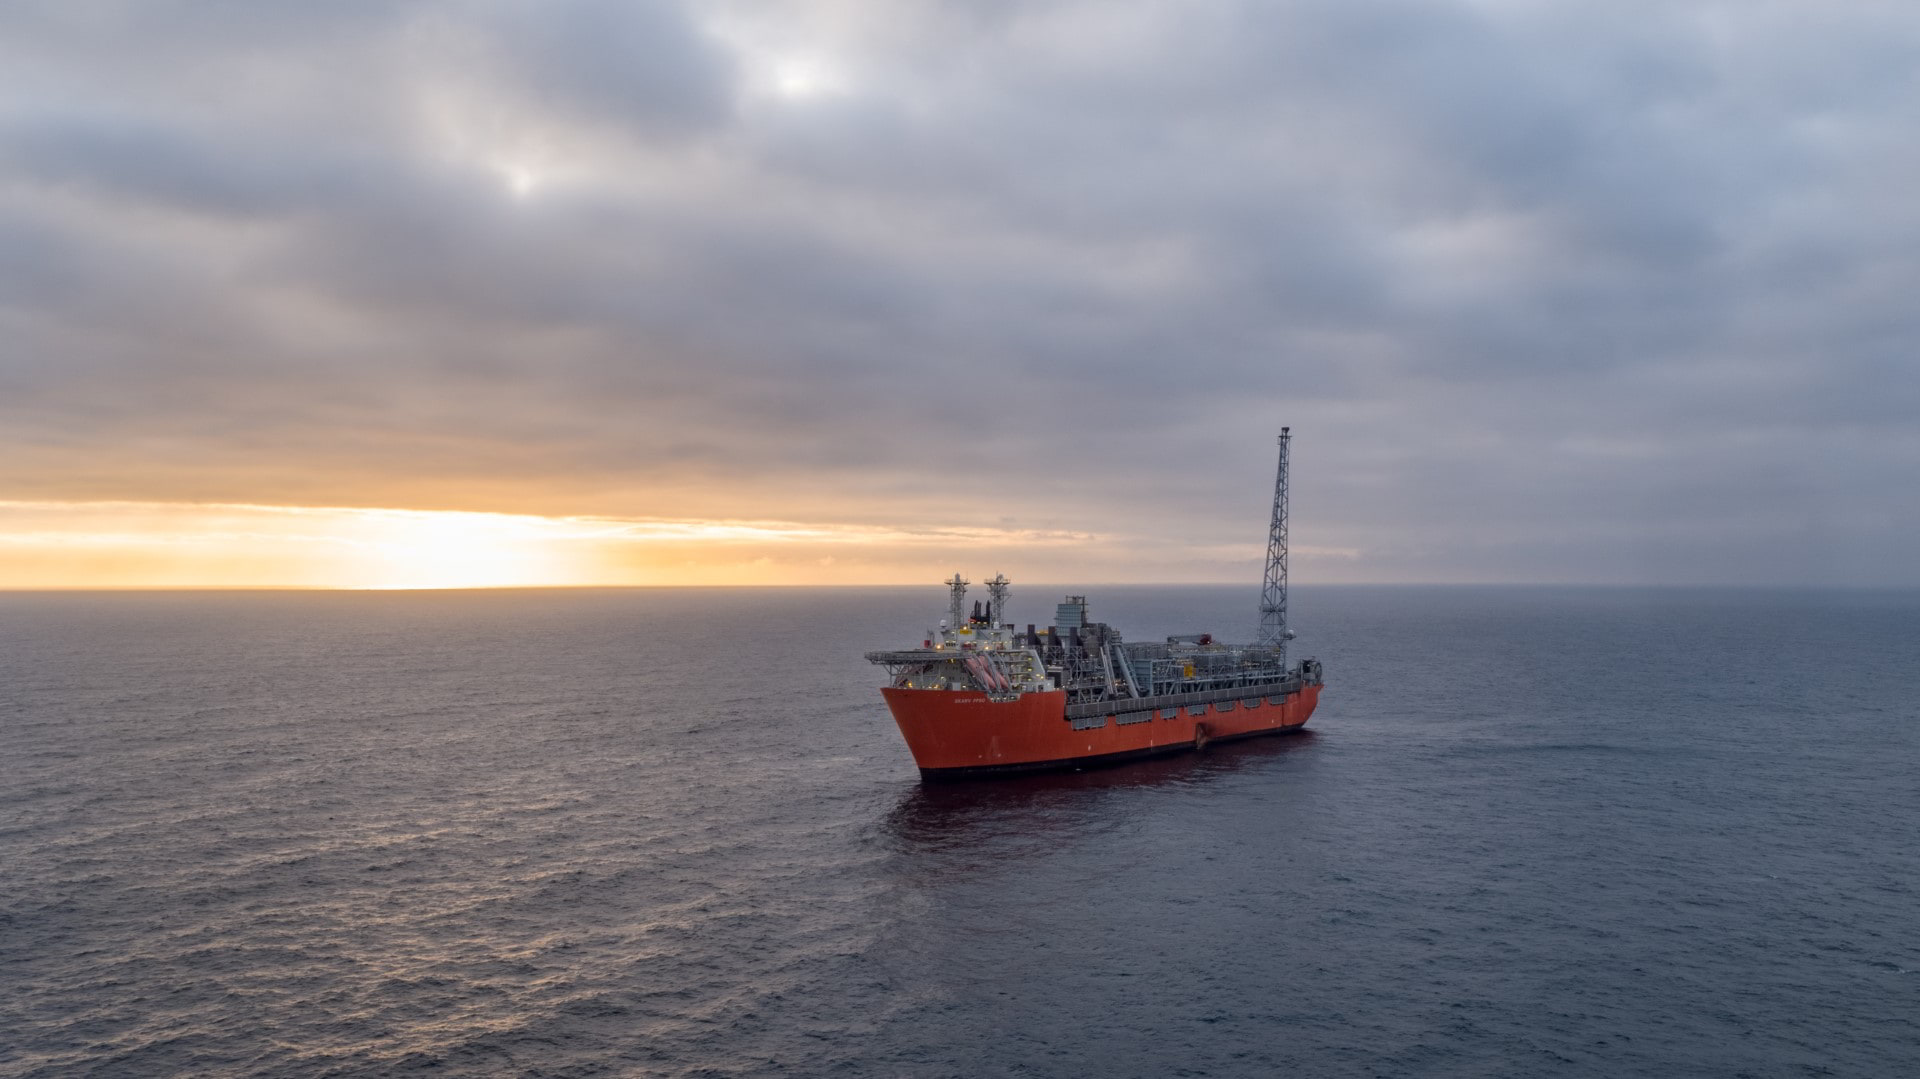 Aker BP wins govt nod to ramp up gas output from Norwegian Sea field